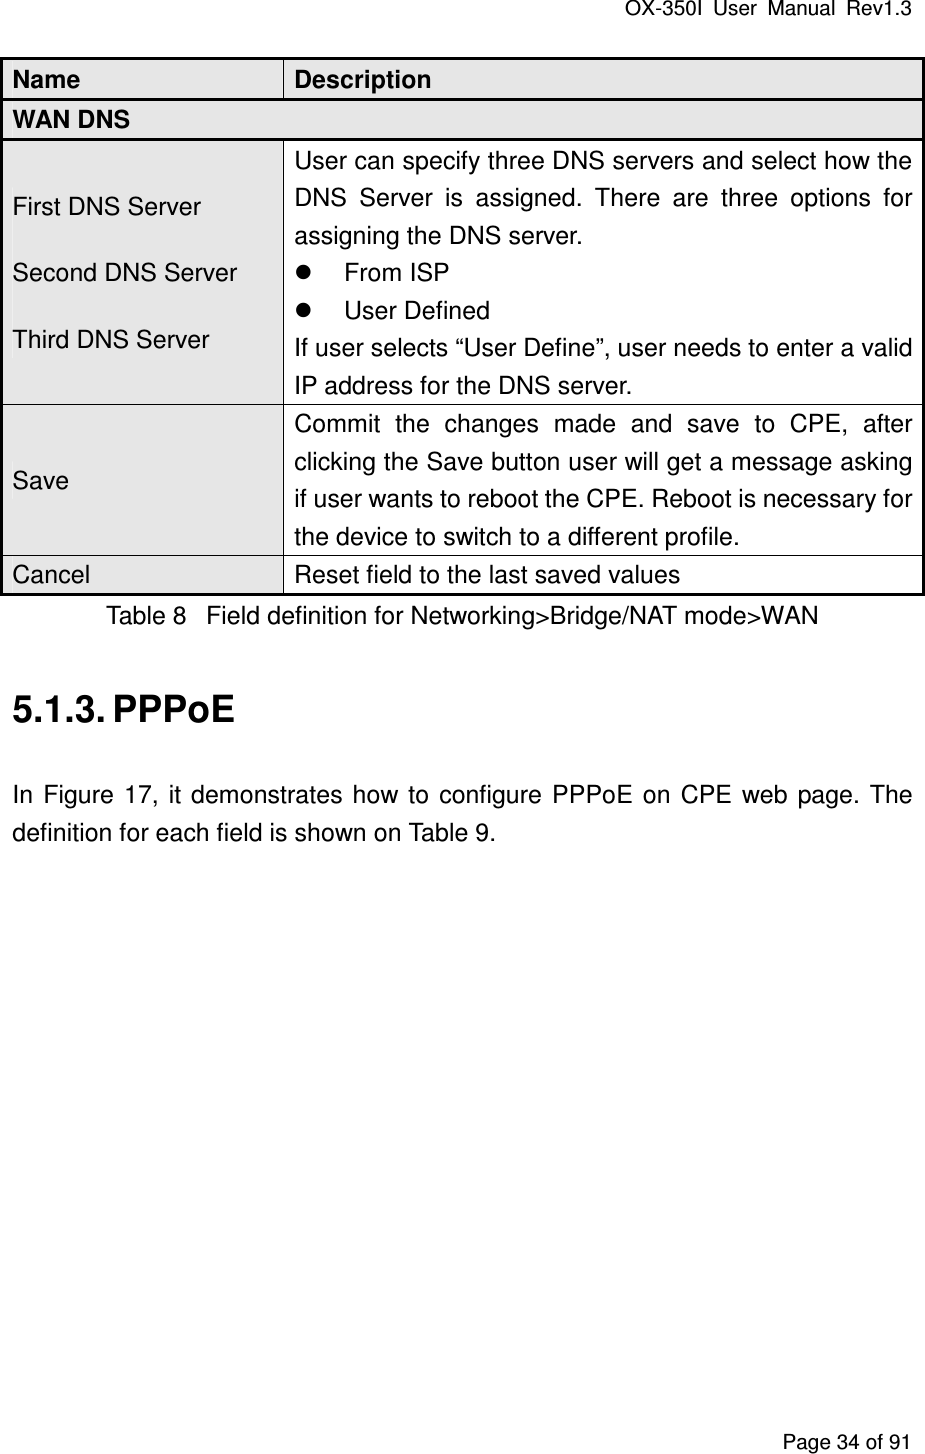 OX-350I  User  Manual  Rev1.3 Page 34 of 91 Name Description WAN DNS First DNS Server Second DNS Server Third DNS Server User can specify three DNS servers and select how the DNS  Server  is  assigned.  There  are  three  options  for assigning the DNS server.   From ISP   User Defined If user selects “User Define”, user needs to enter a valid IP address for the DNS server.   Save Commit  the  changes  made  and  save  to  CPE,  after clicking the Save button user will get a message asking if user wants to reboot the CPE. Reboot is necessary for the device to switch to a different profile. Cancel  Reset field to the last saved values Table 8  Field definition for Networking&gt;Bridge/NAT mode&gt;WAN 5.1.3. PPPoE In  Figure  17, it demonstrates  how to  configure  PPPoE on  CPE  web  page.  The definition for each field is shown on Table 9. 